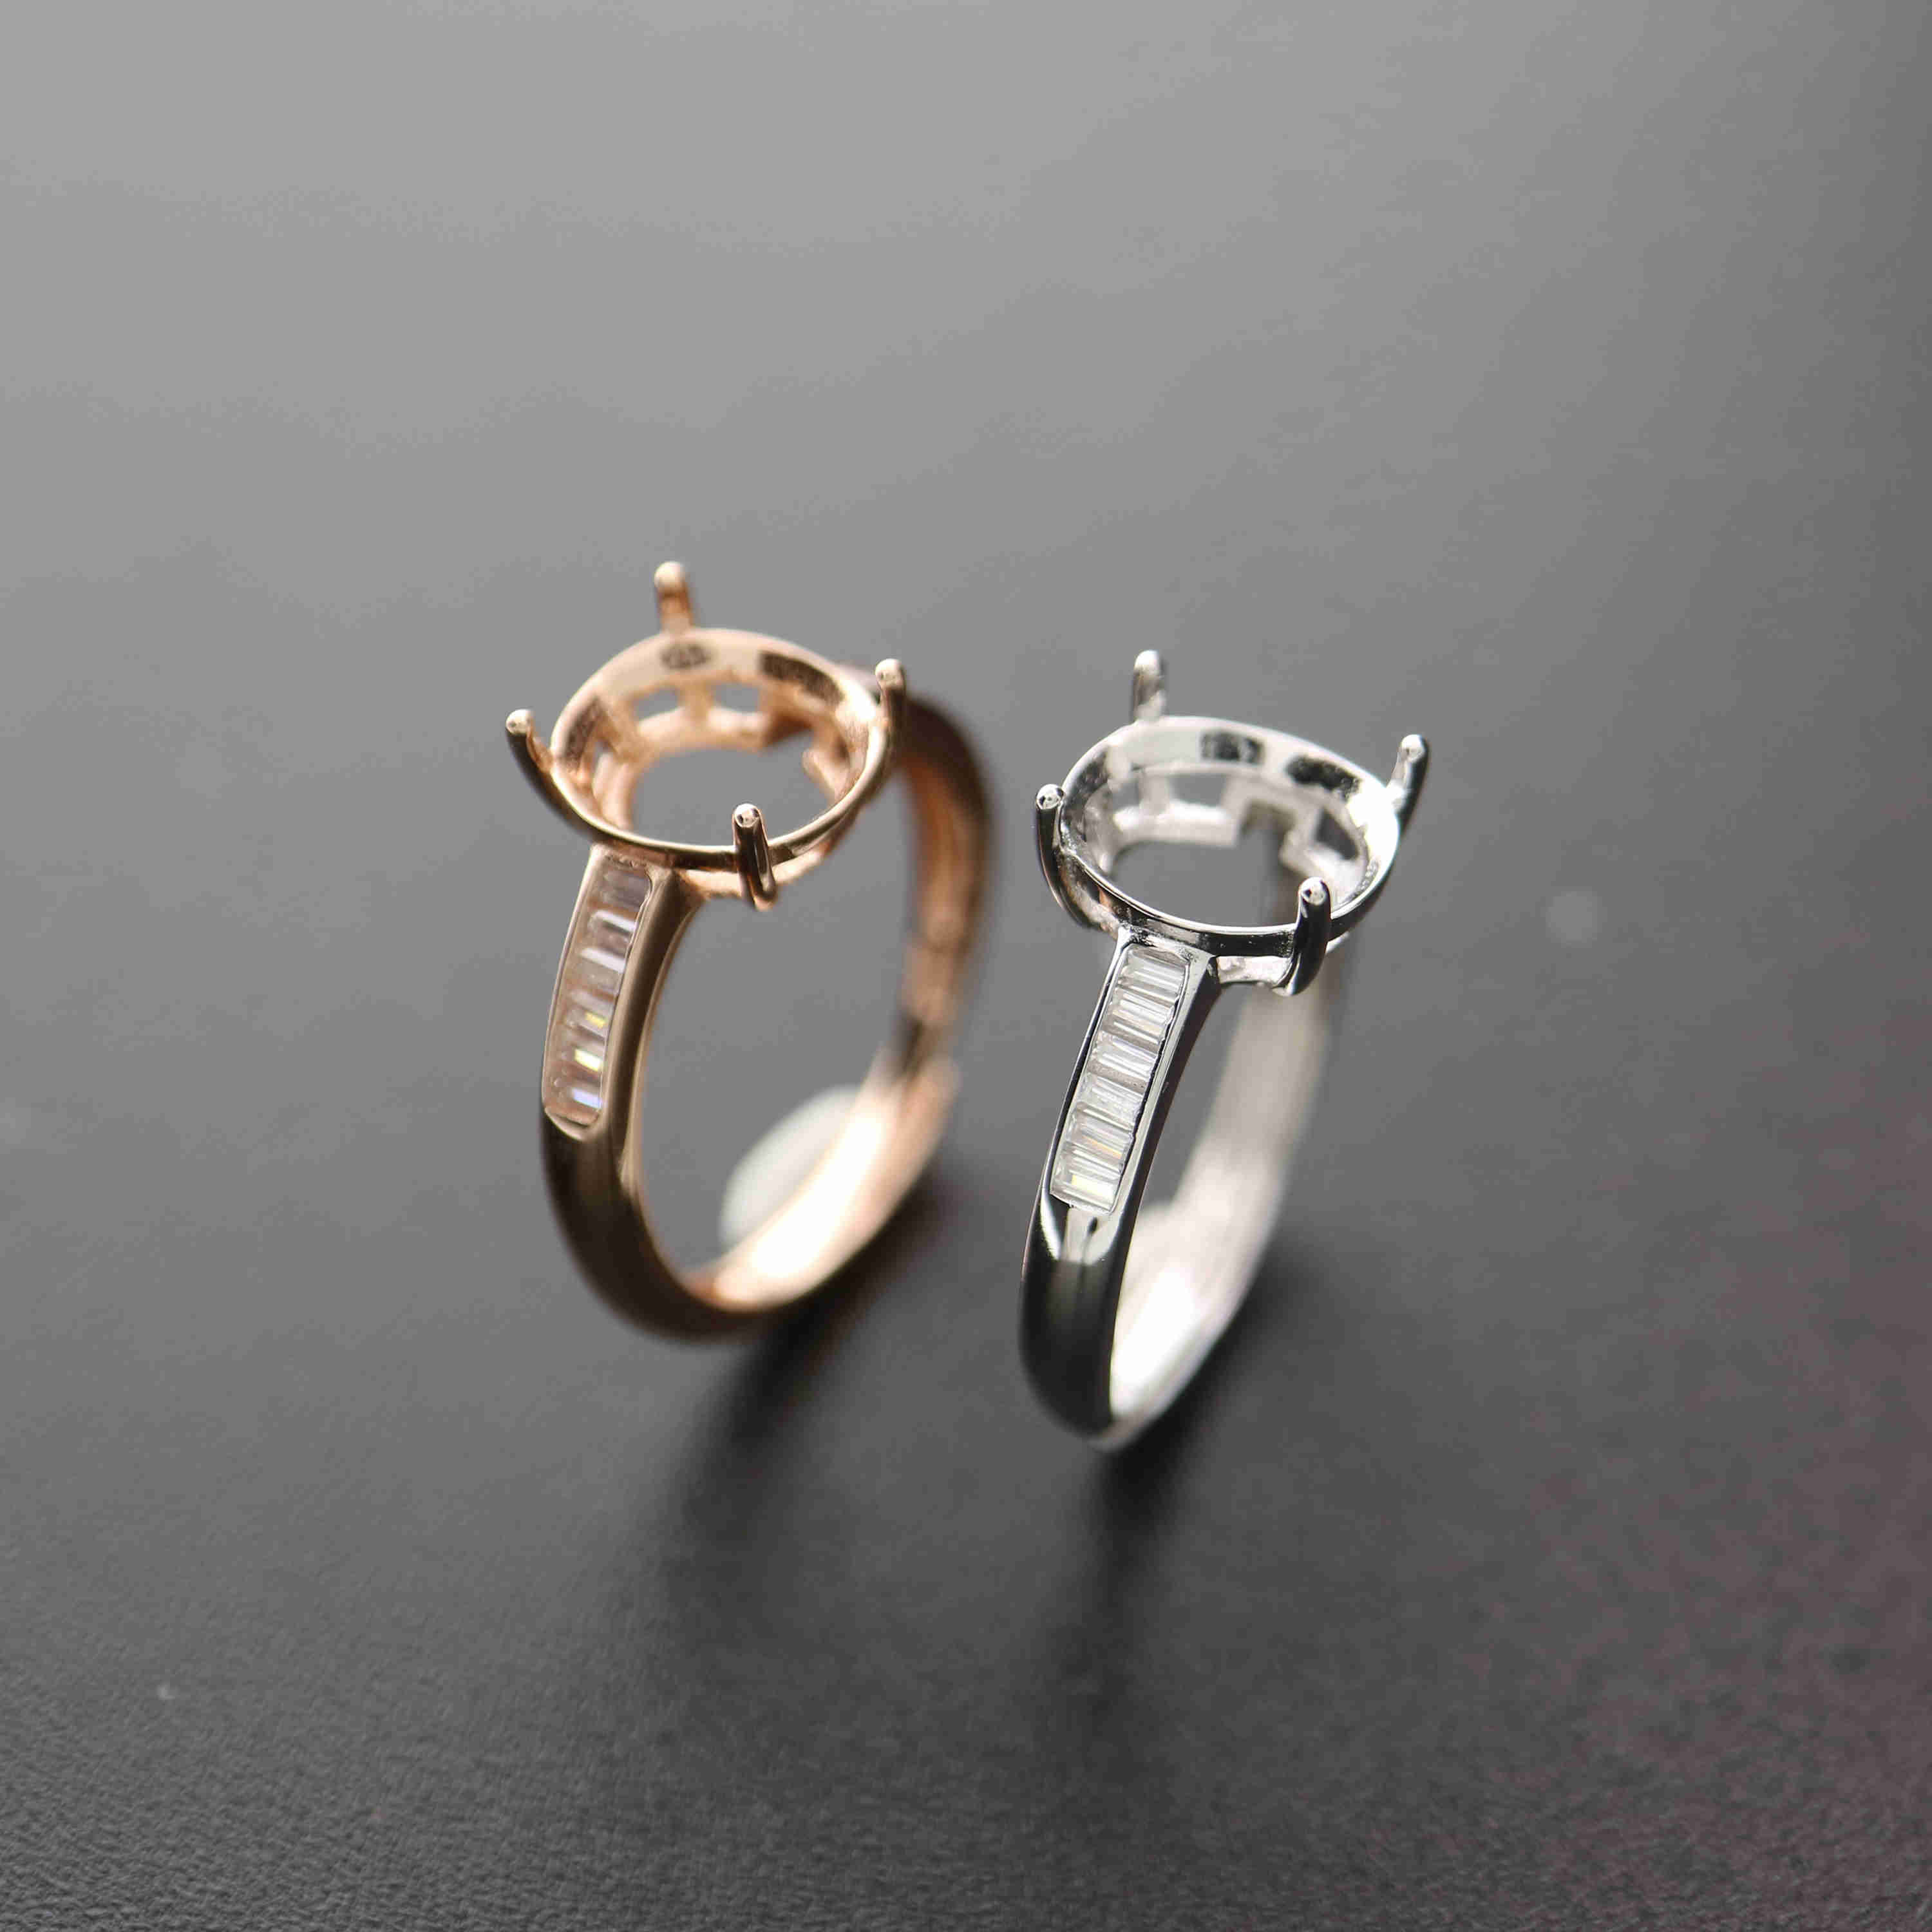 1Pcs Multiple Sizes Oval Simple Rose Gold Silver Gems Cz Stone Prong Bezel Solid 925 Sterling Silver Adjustable Ring Settings 1224011 - Click Image to Close